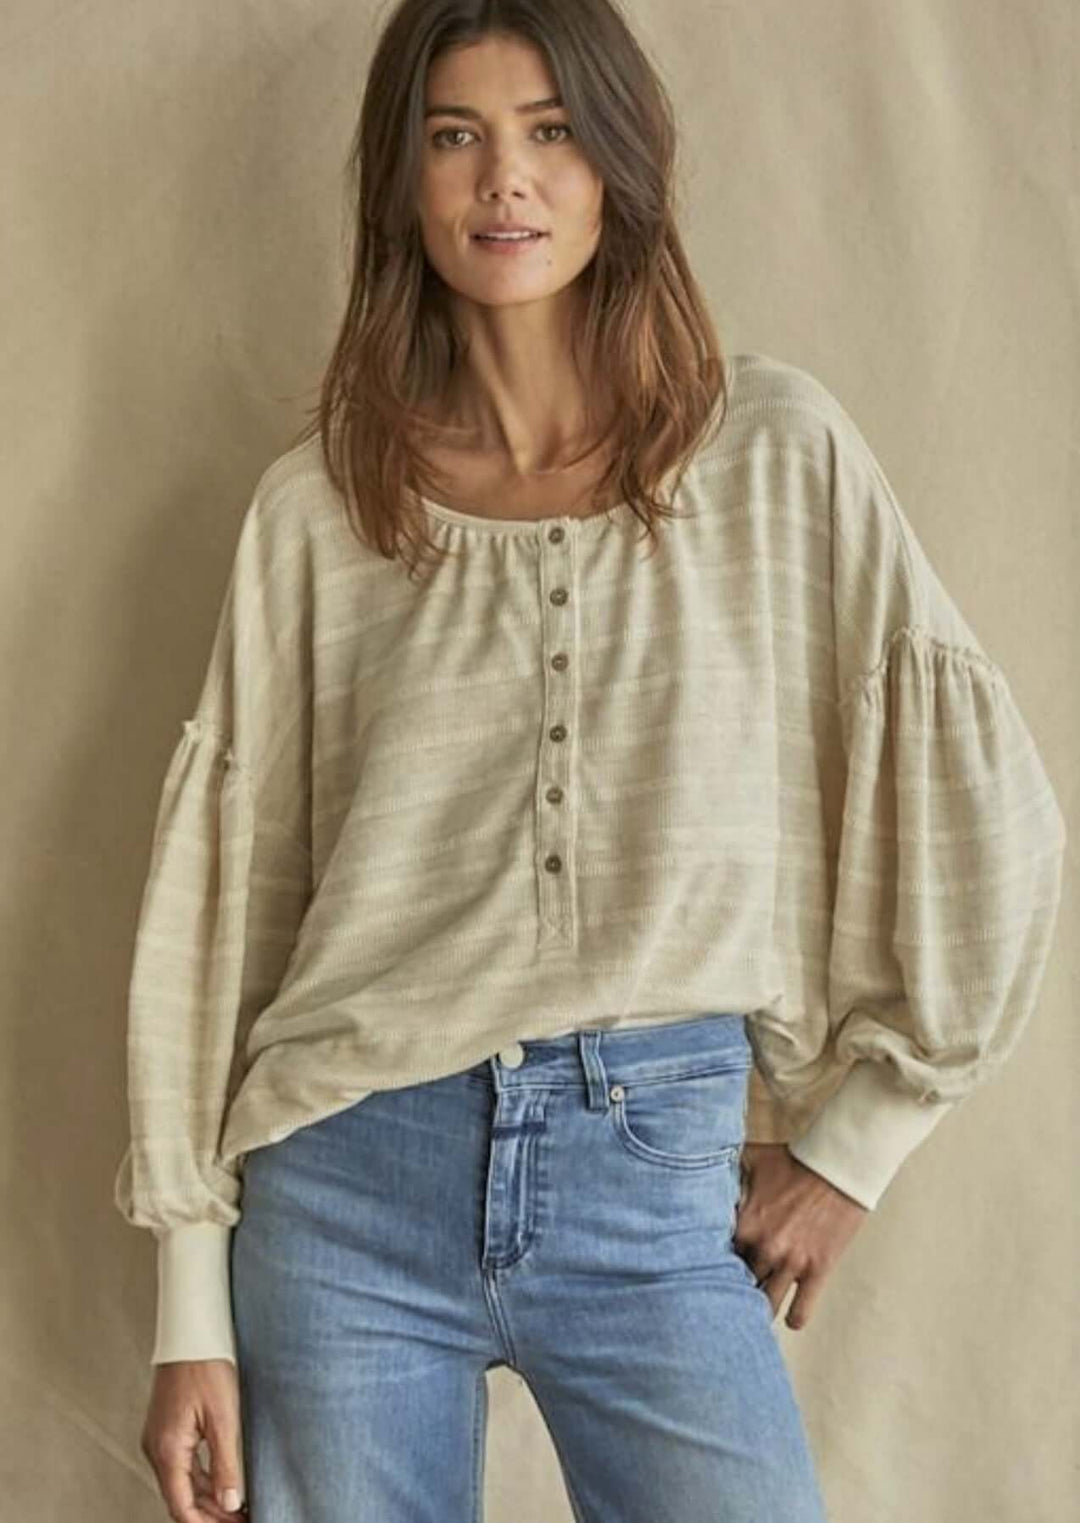 Ladies Knit Thermal Striped Long Sleeve Henley Oversized Boxy Top in Oatmeal Color | By Together Style# RJ2504 |Made in USA | Classy Cozy Cool Women's Made in America Online Clothing Boutique 